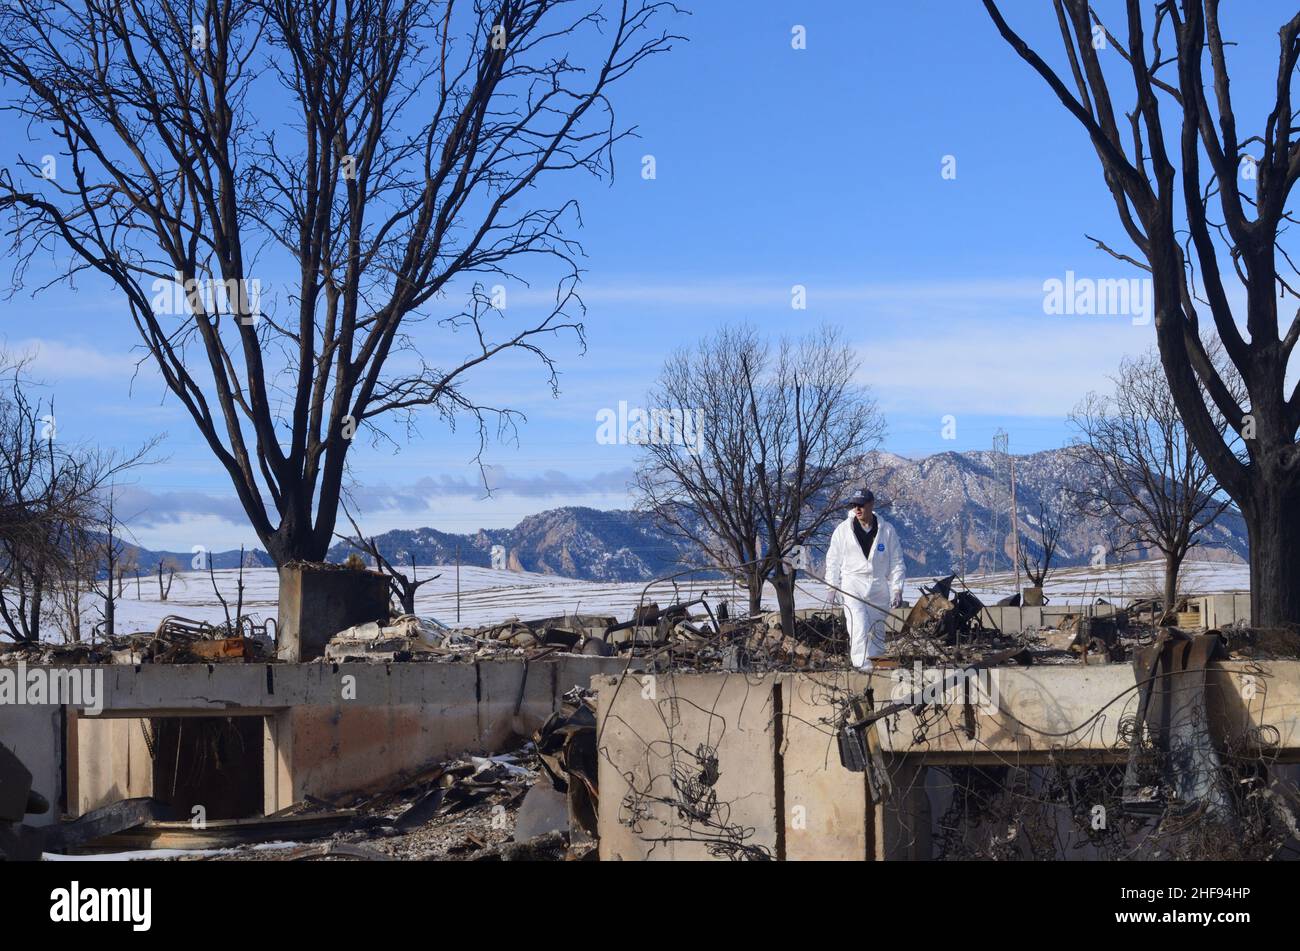 Brent Peckham surveys what is left of his Superior CO home, which was destroyed in the Marshall Fire, Dec. 20, 2021. He found little worth saving. Stock Photo